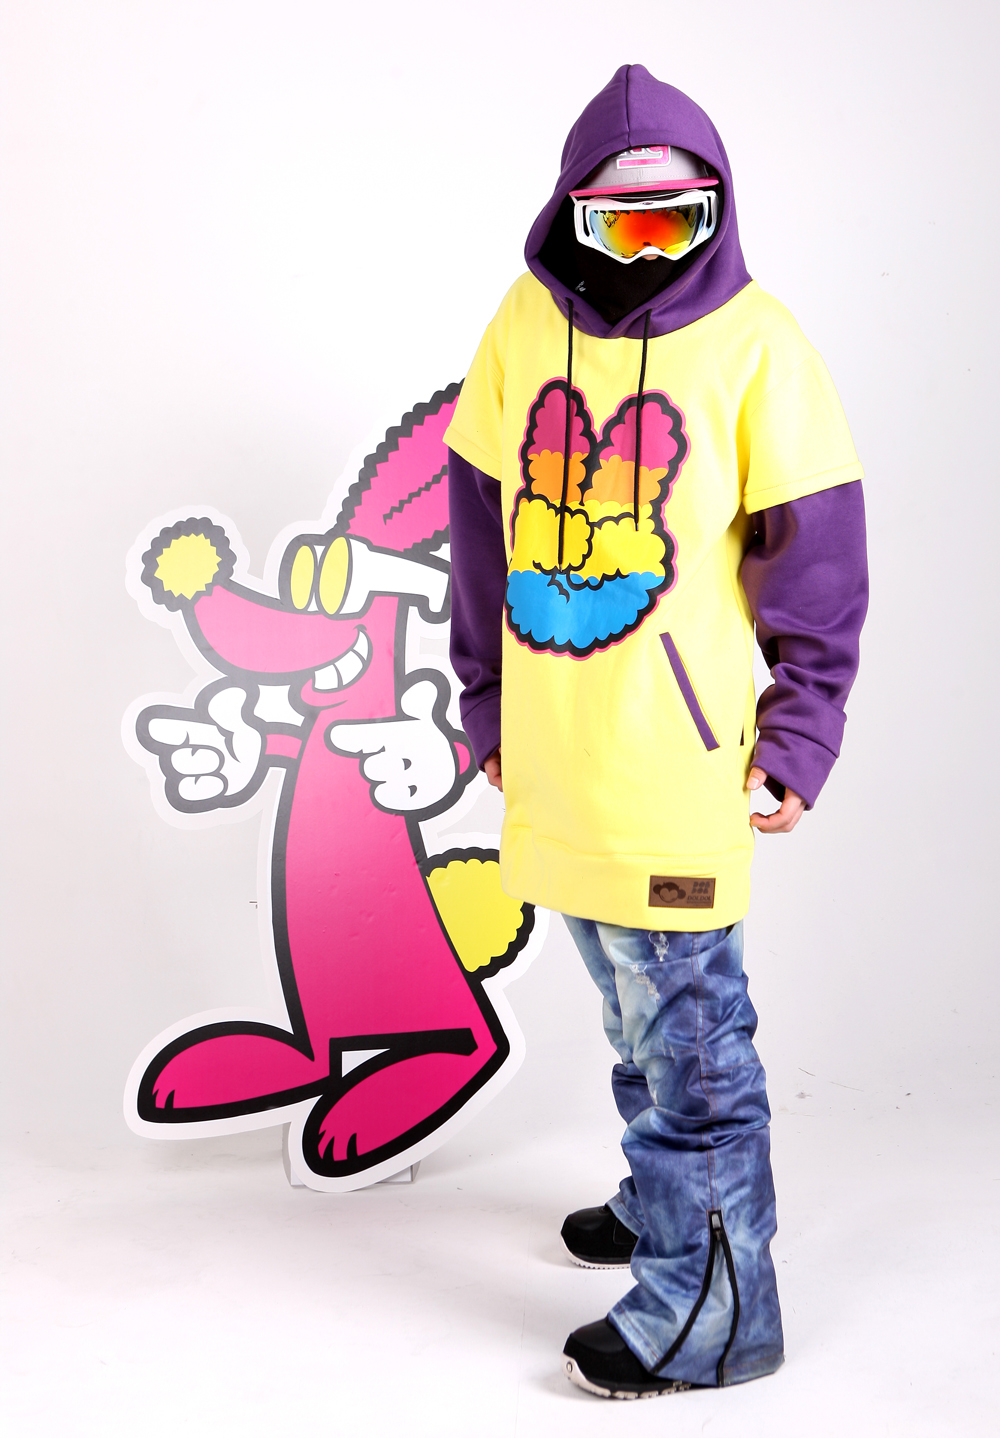 #Snowboard #kangaroo #characterdesign #doldoldesign #cottoncandy #candyd #lolypoly #application   #collaboration #돌돌디자인